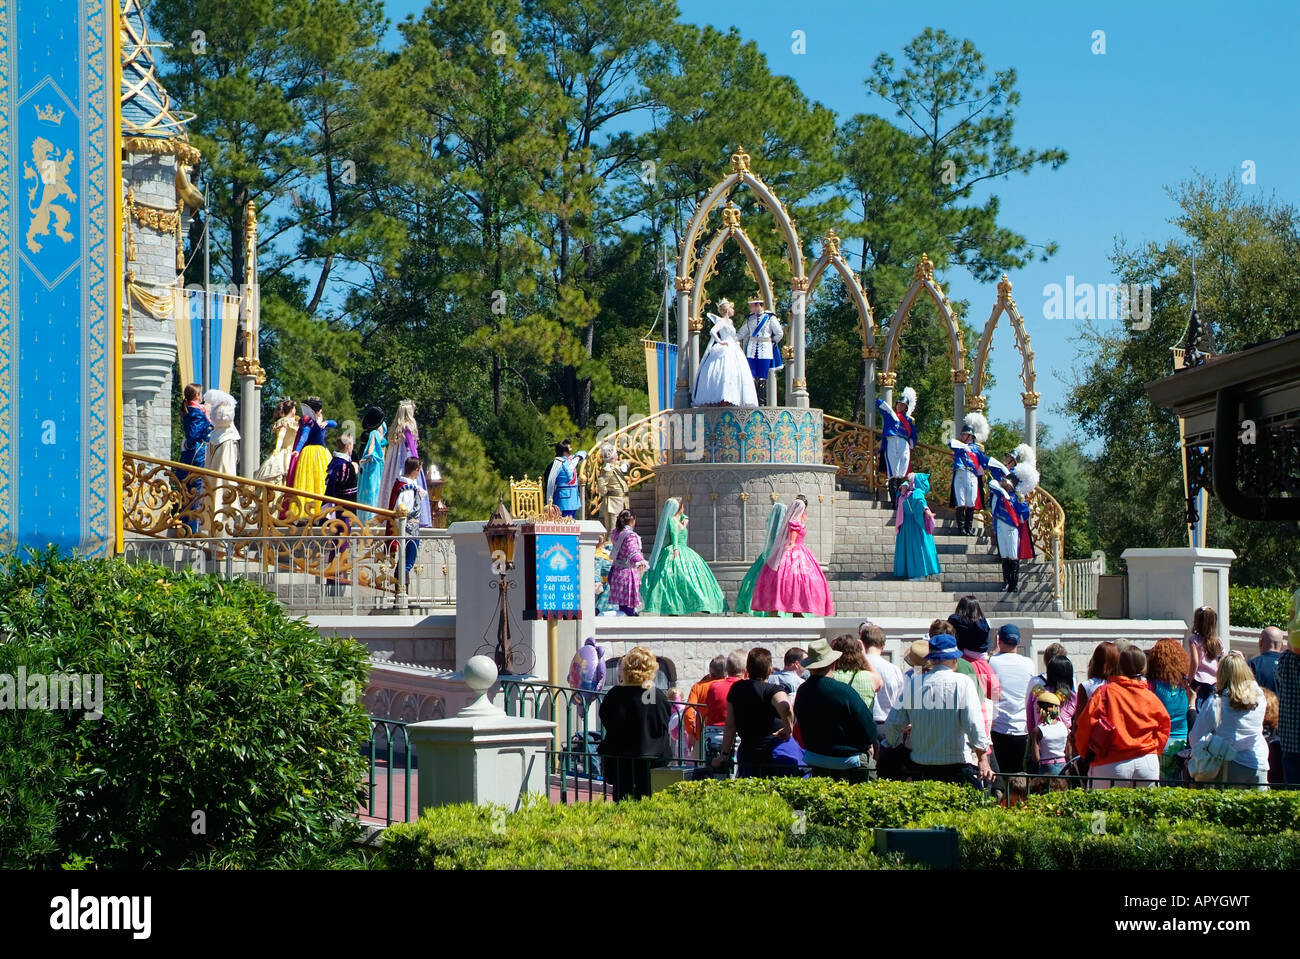 A glorious wedding at the Cinderella Castle in Walt Disney World between Cinderella and Prince Charming. Stock Photo